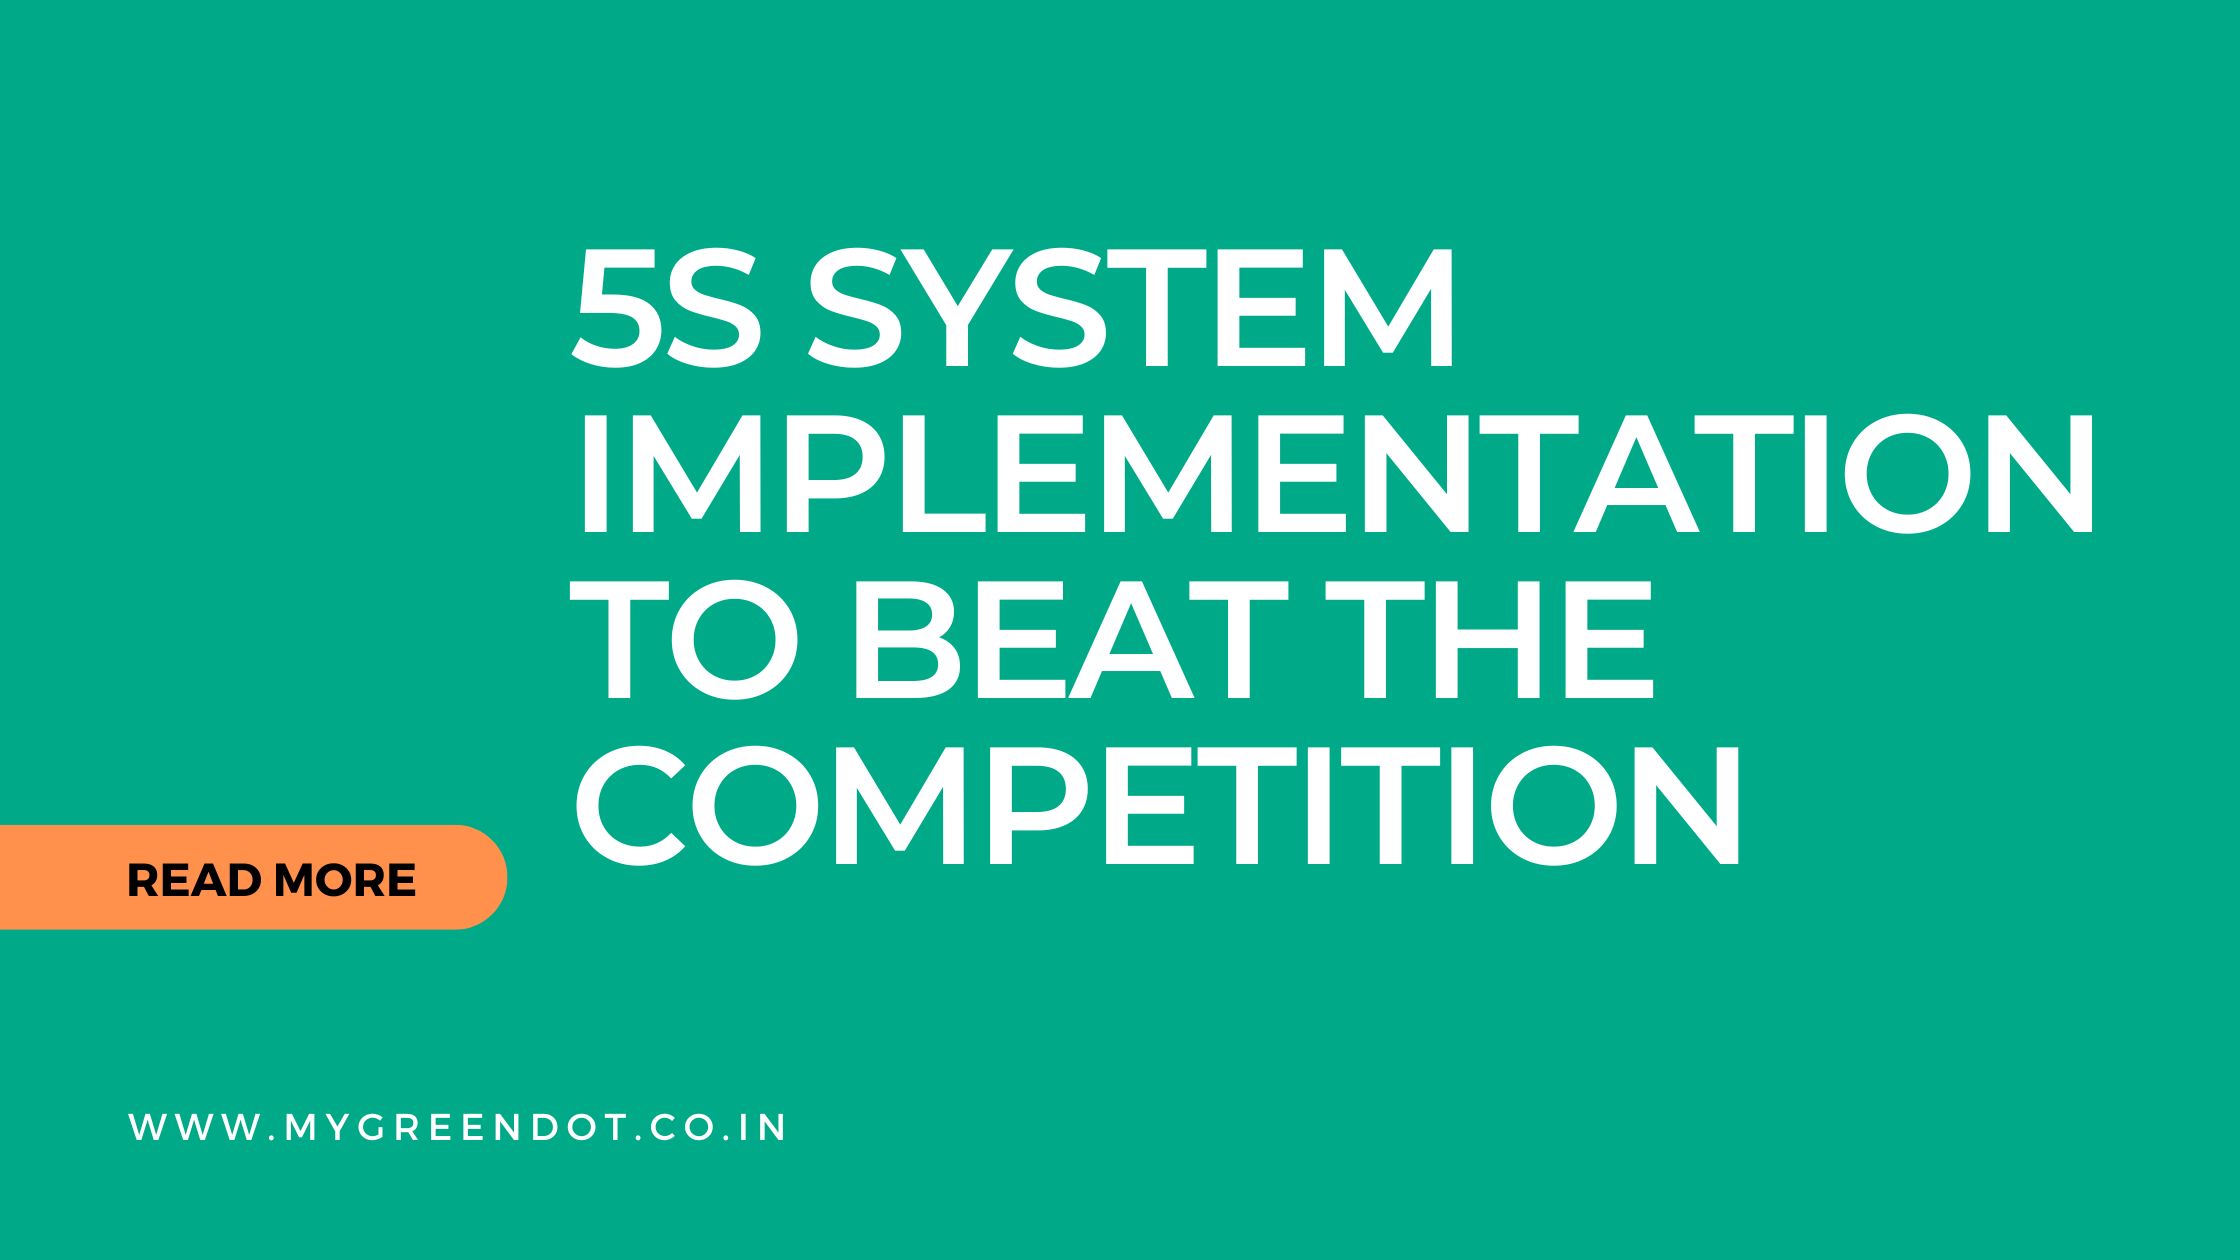 what is 5s system